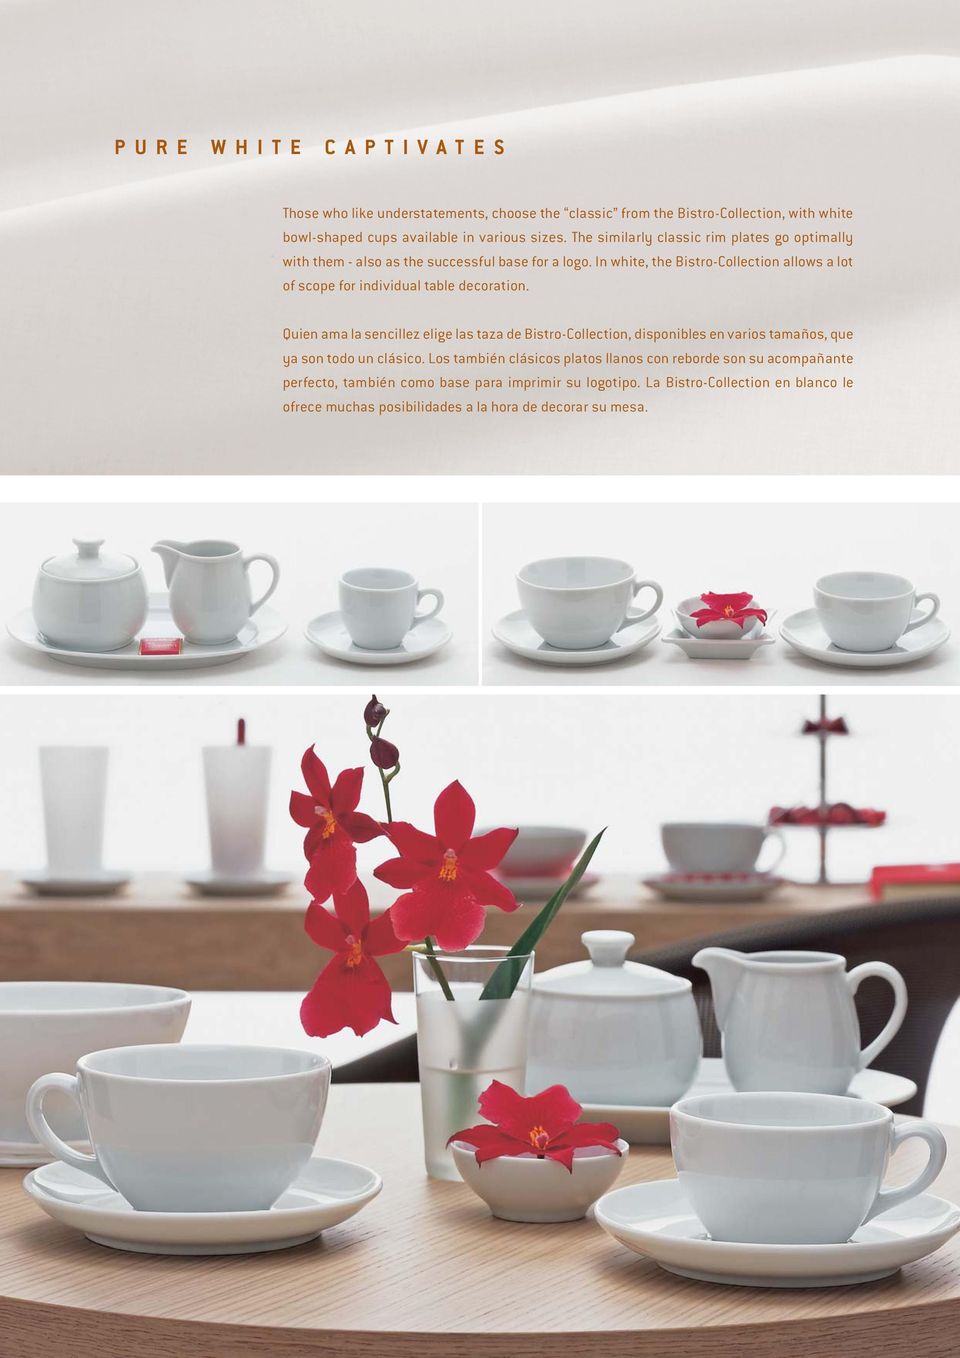 In white, the Bistro-Collection allows a lot of scope for individual table decoration.